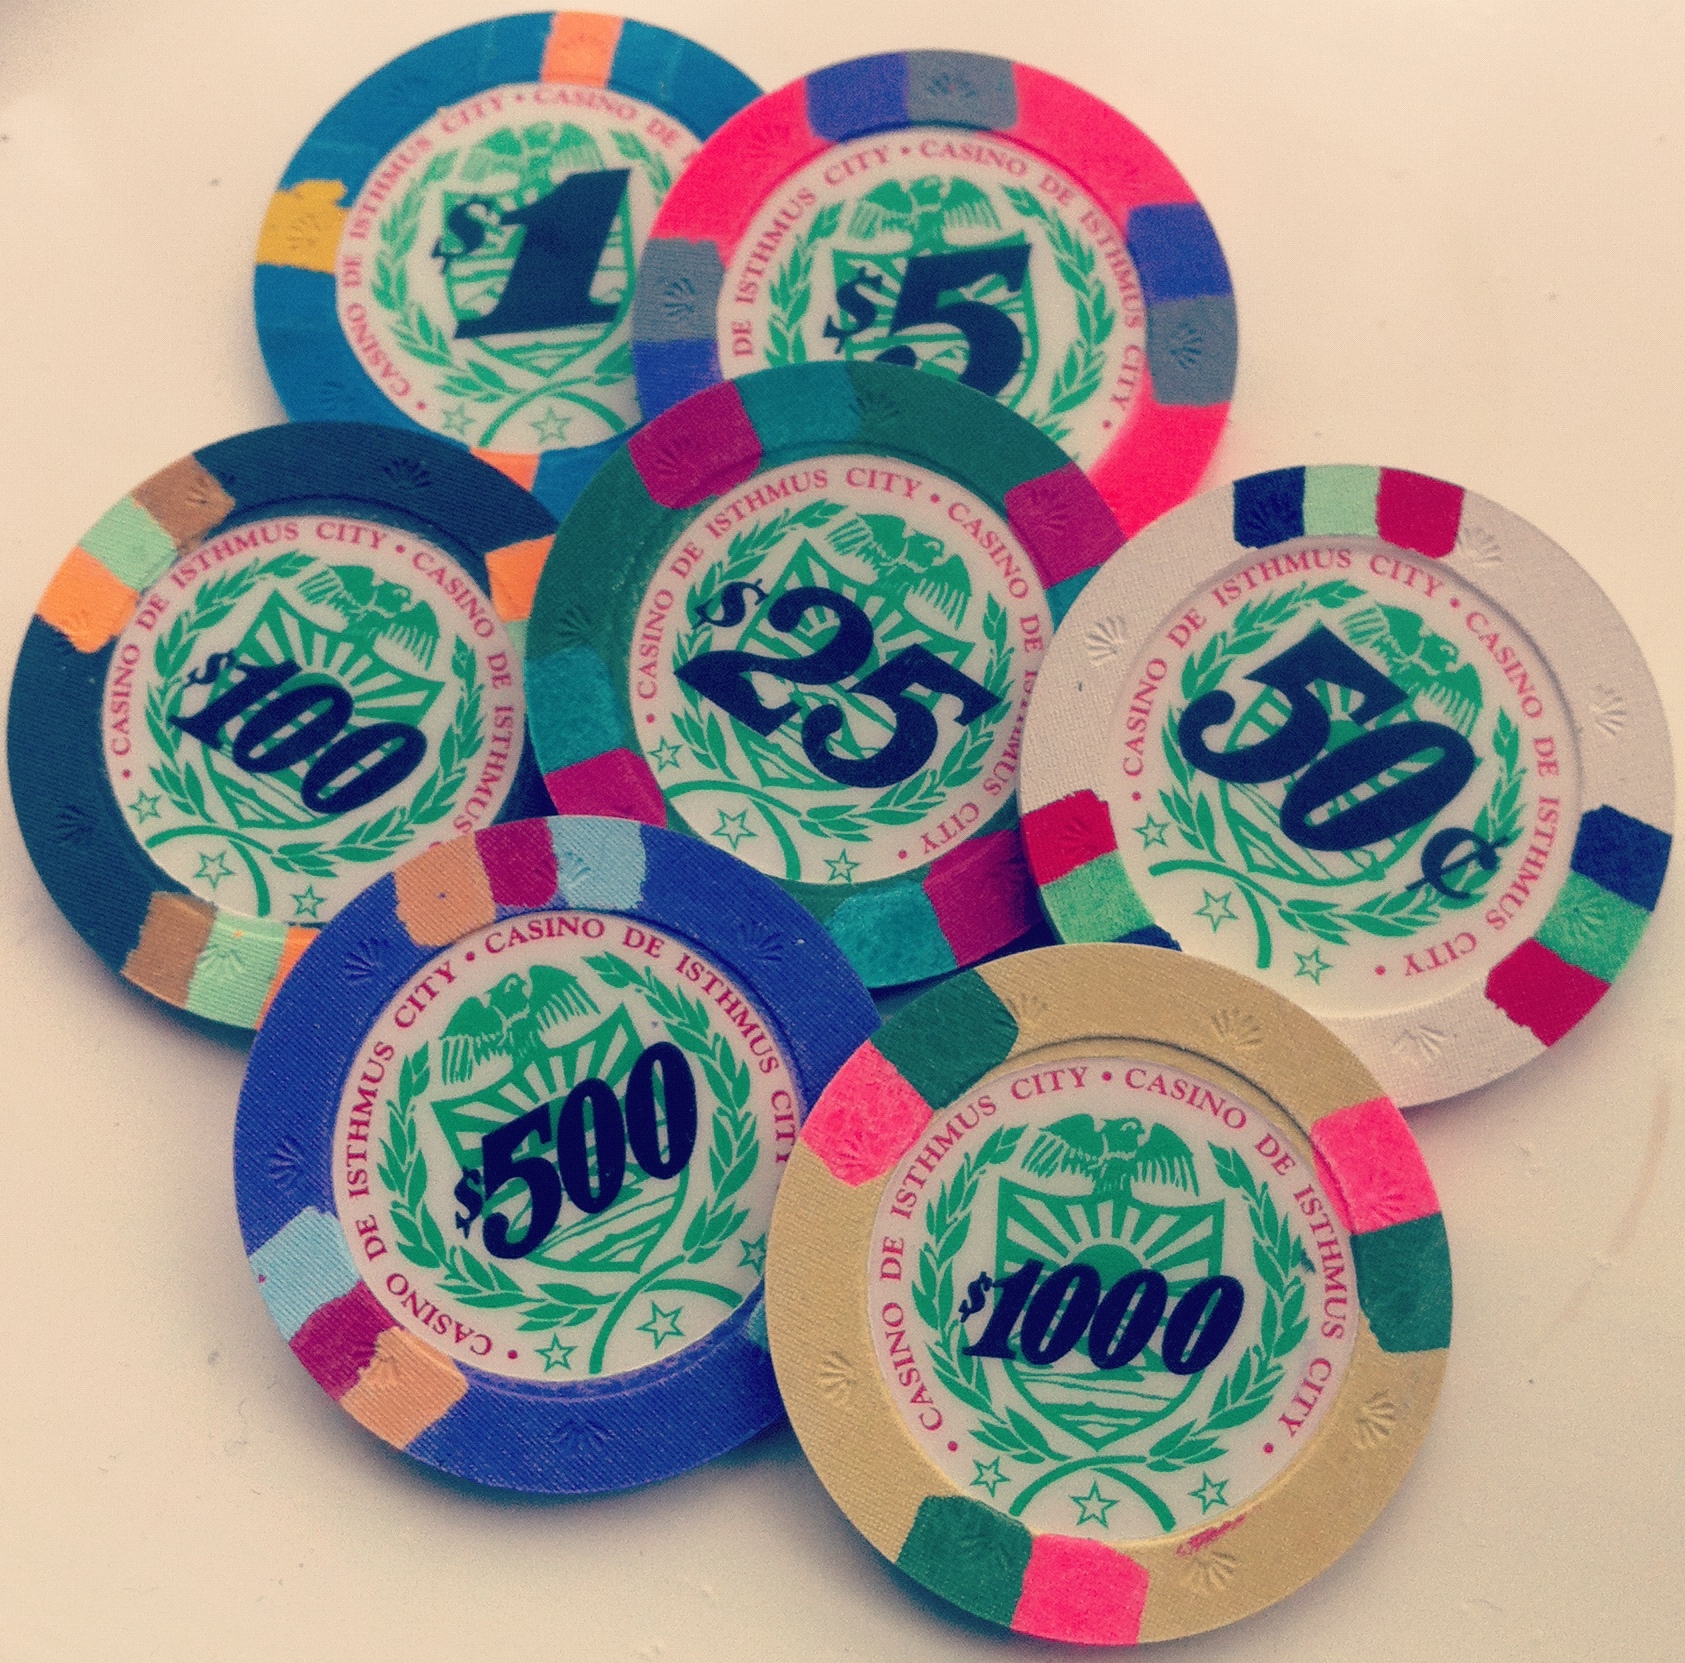 Sell vintage casino chips